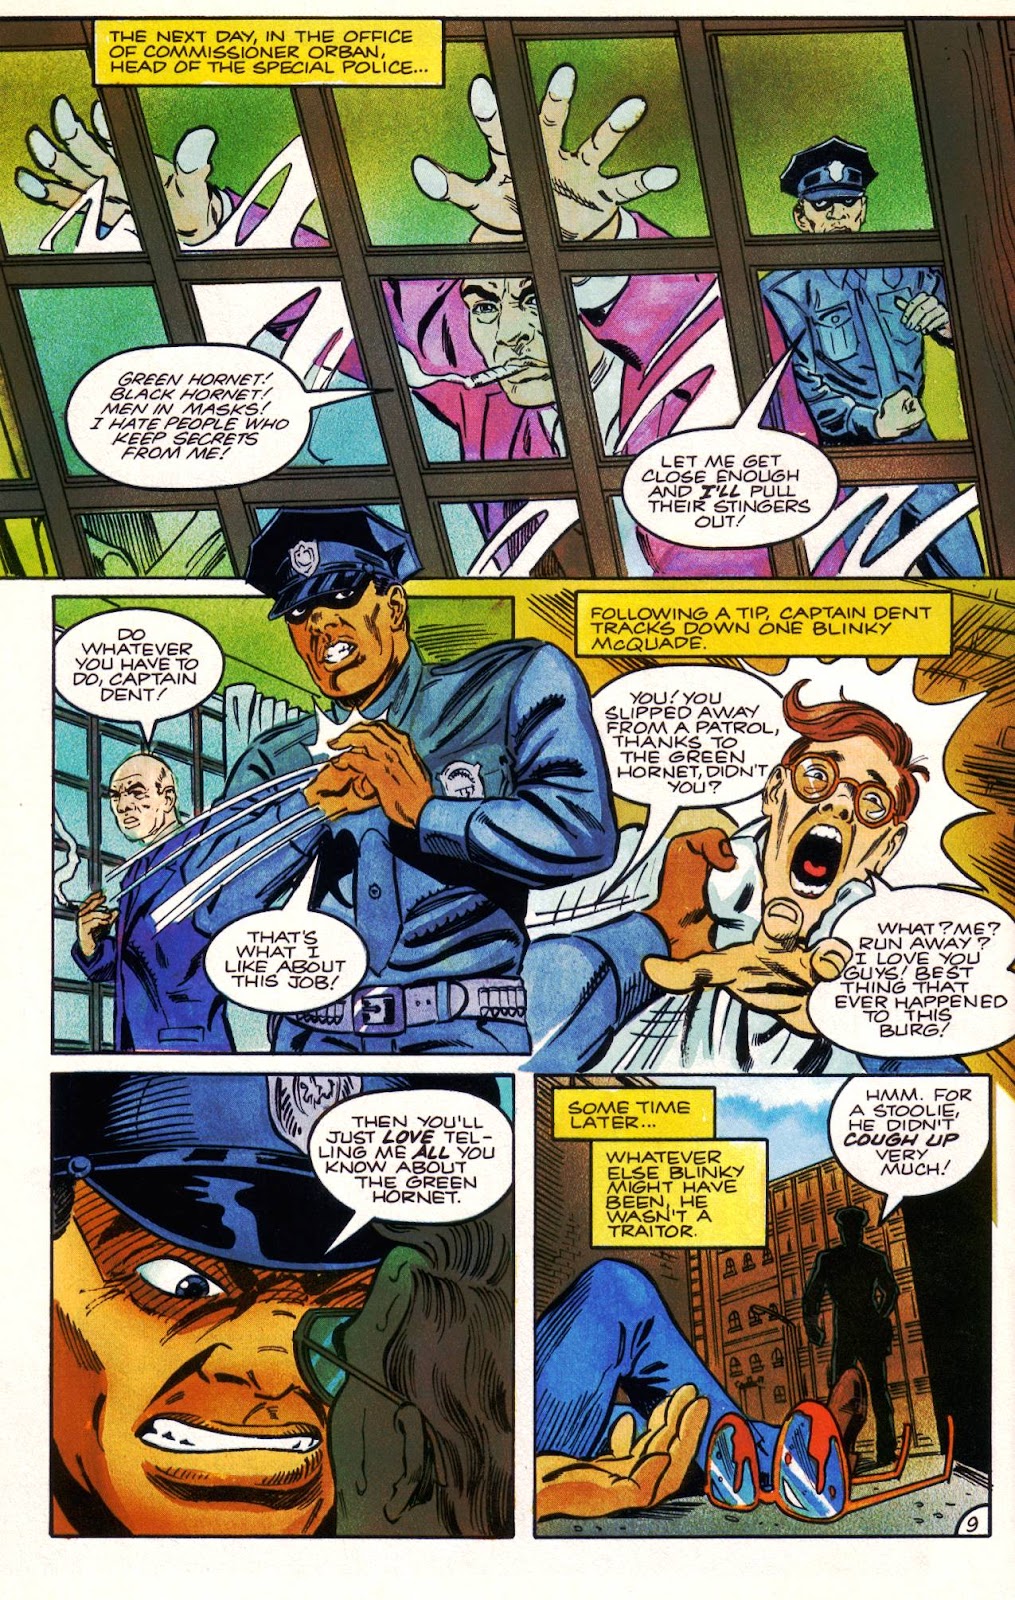 The Green Hornet: Solitary Sentinel issue 3 - Page 11